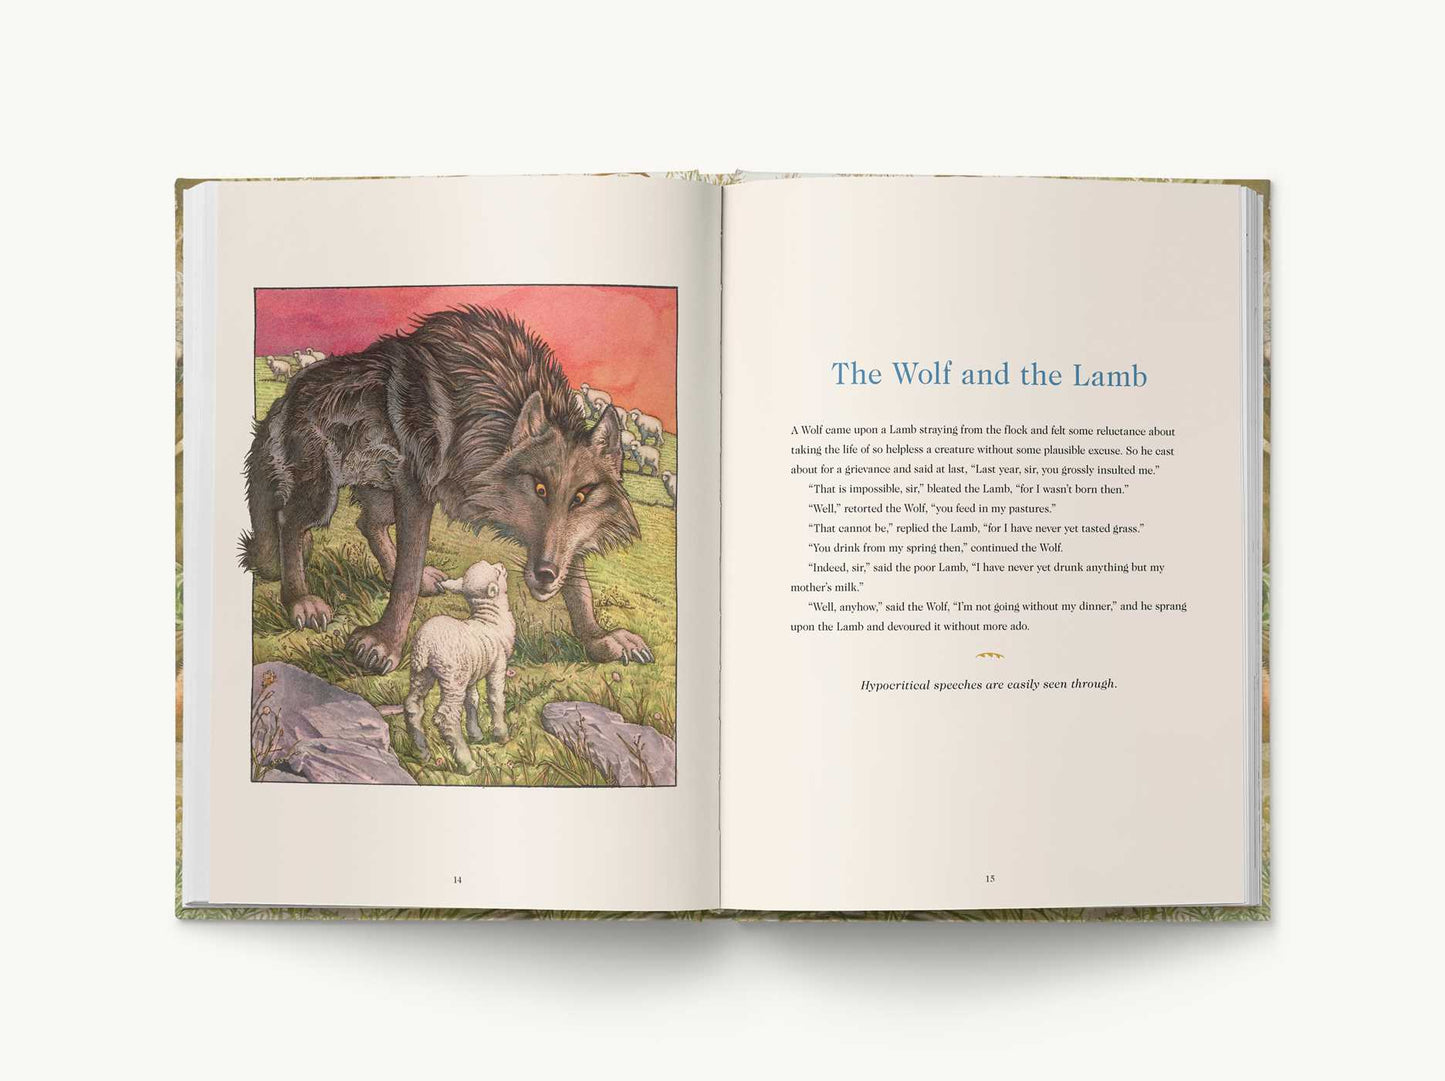 Aesop's Fables Hardcover: The Classic Edition by acclaimed illustrator, Charles Santore